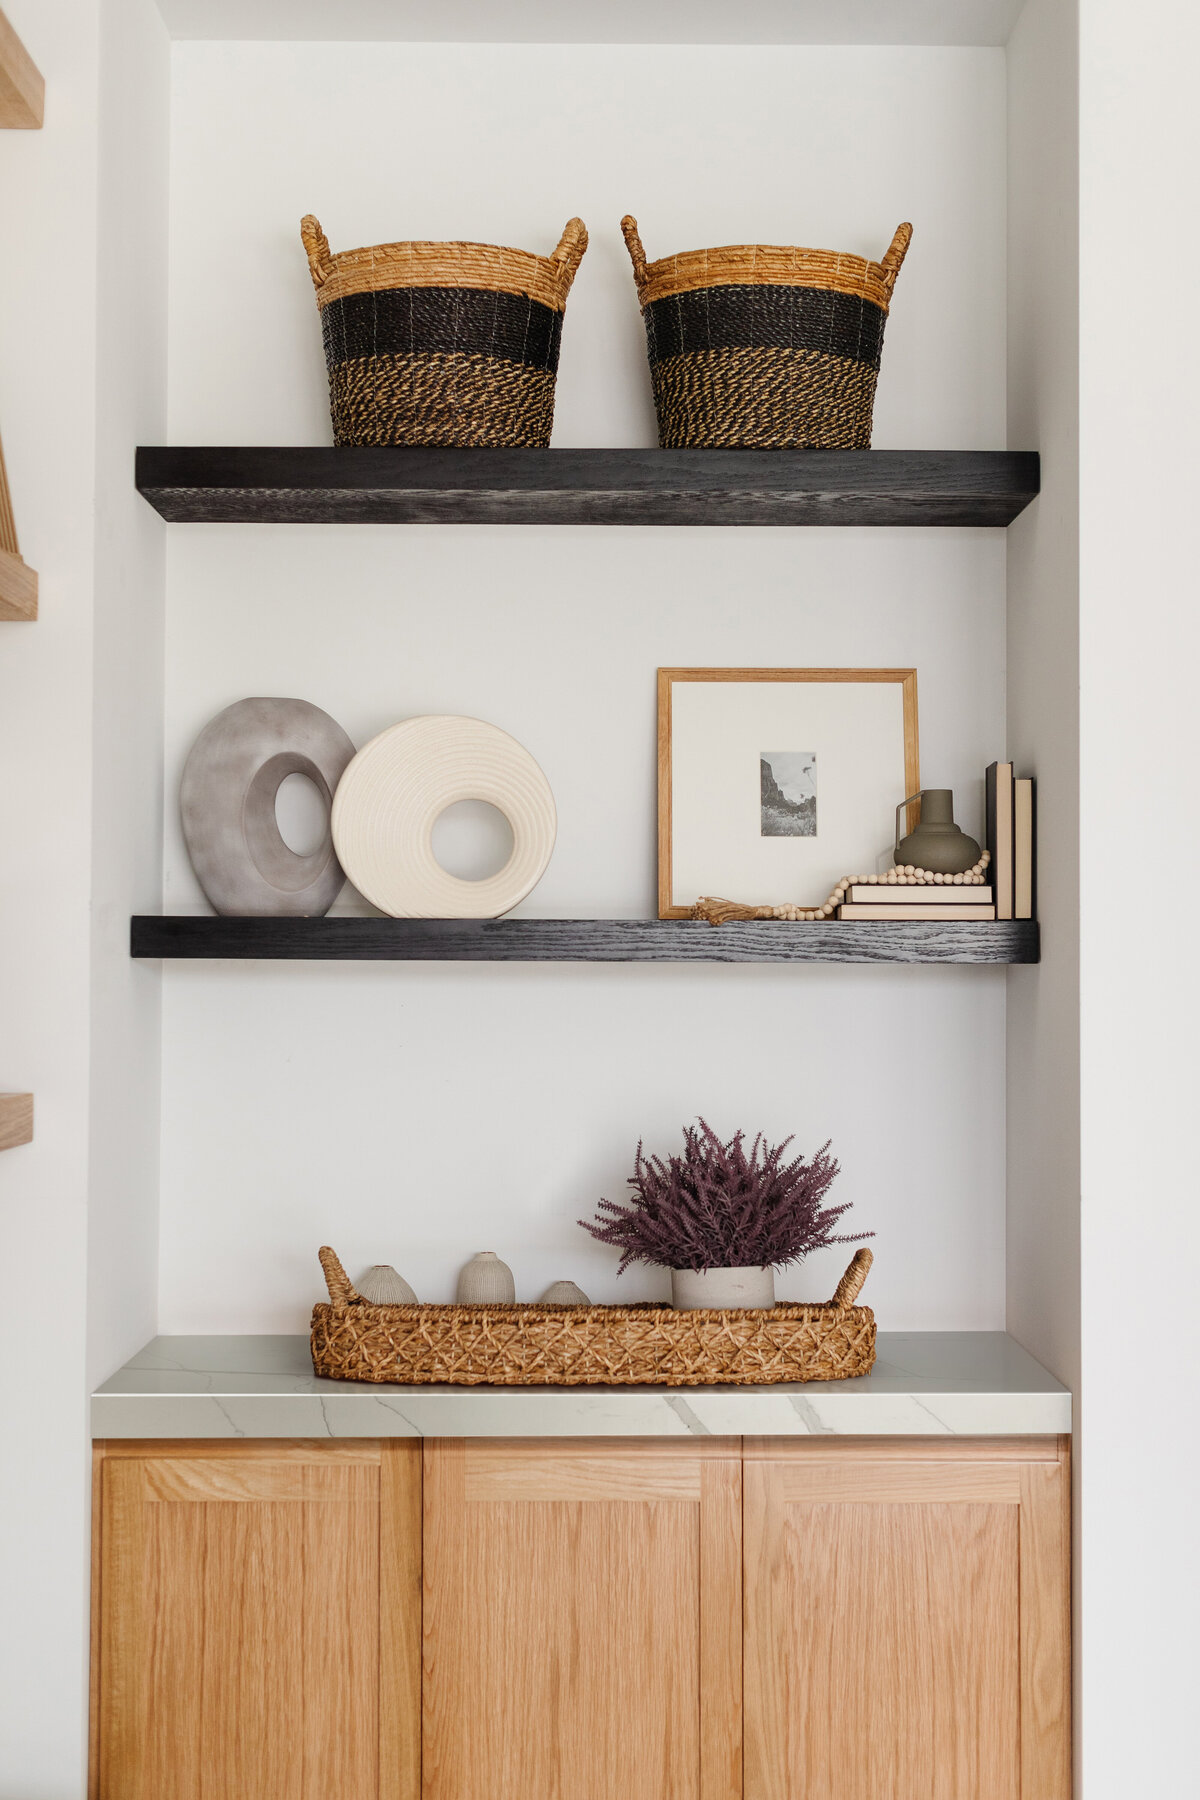 Wicker baskets and accents on dark wood shelves